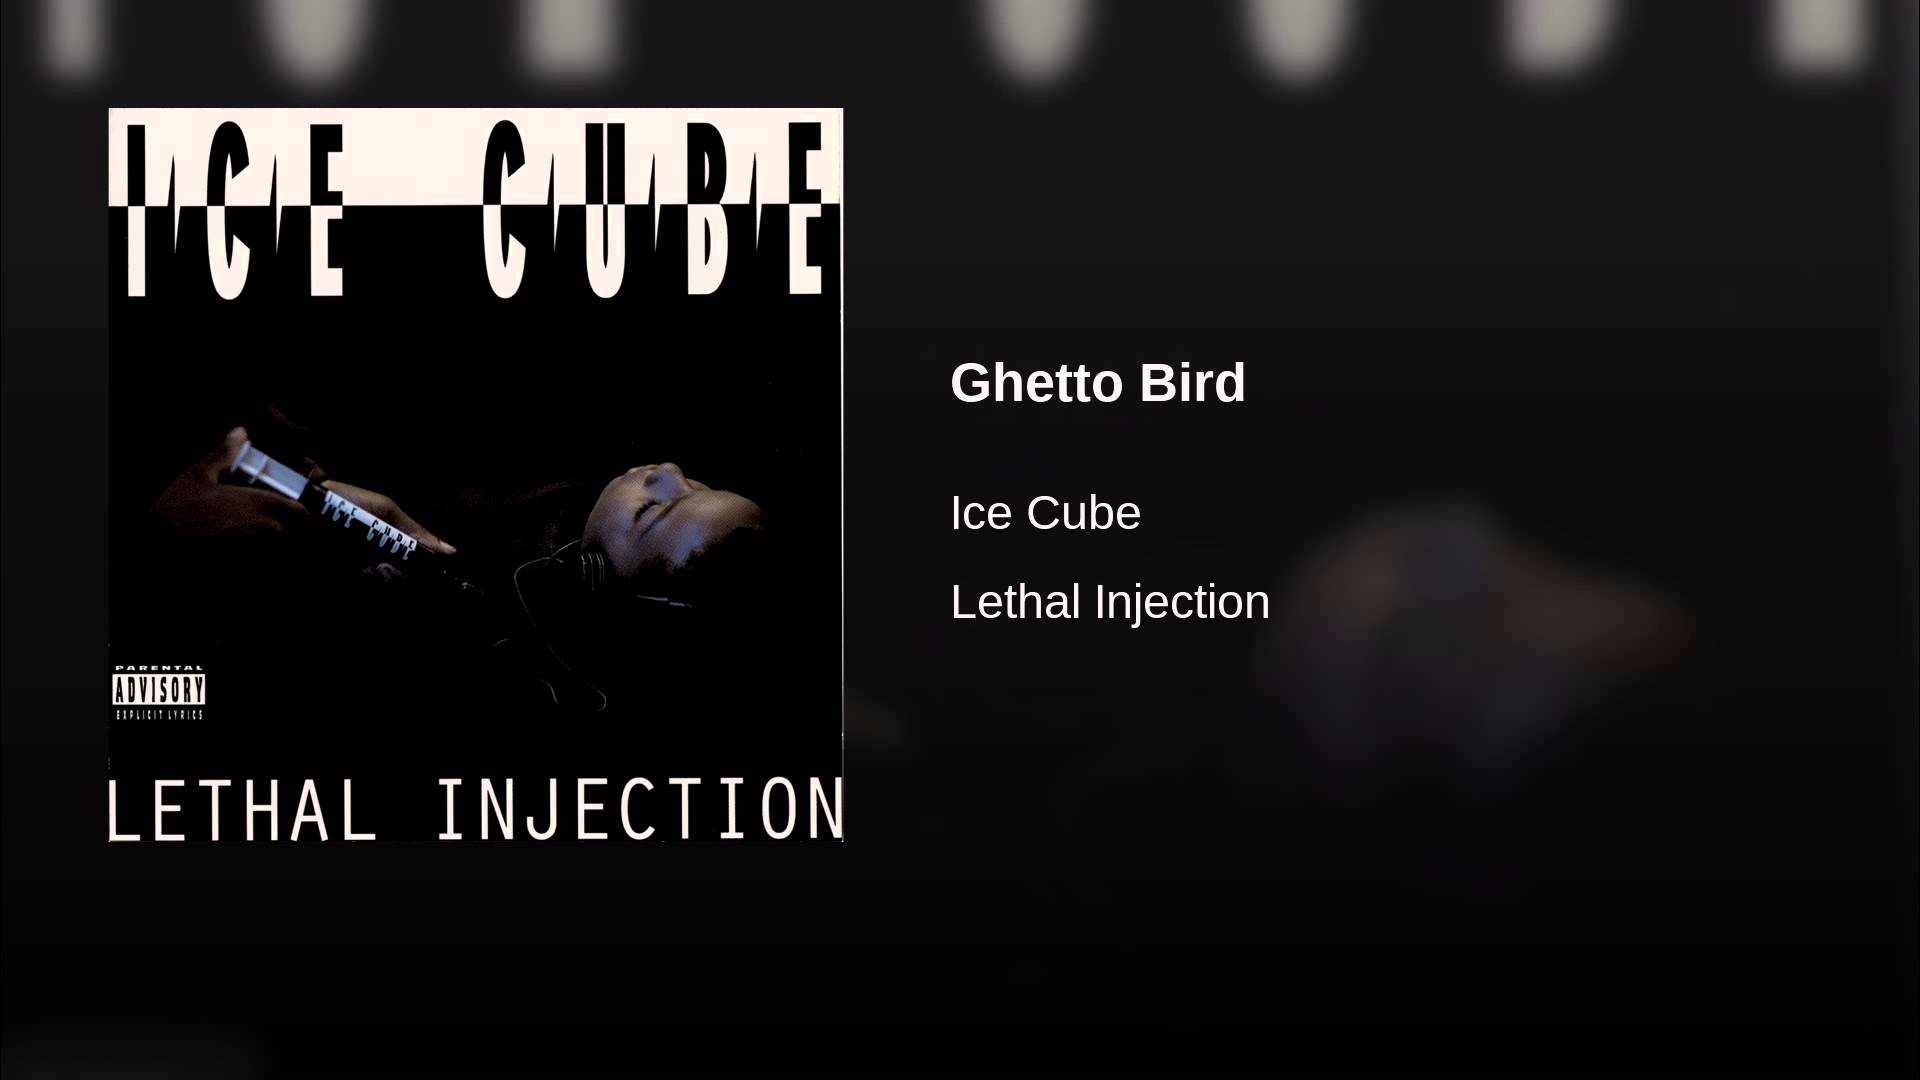 Ice cube down down. Ice Cube you know how we do it. Ice Cube Lethal Injection. Ghetto Bird от Ice Cube. Ice Cube you know how.